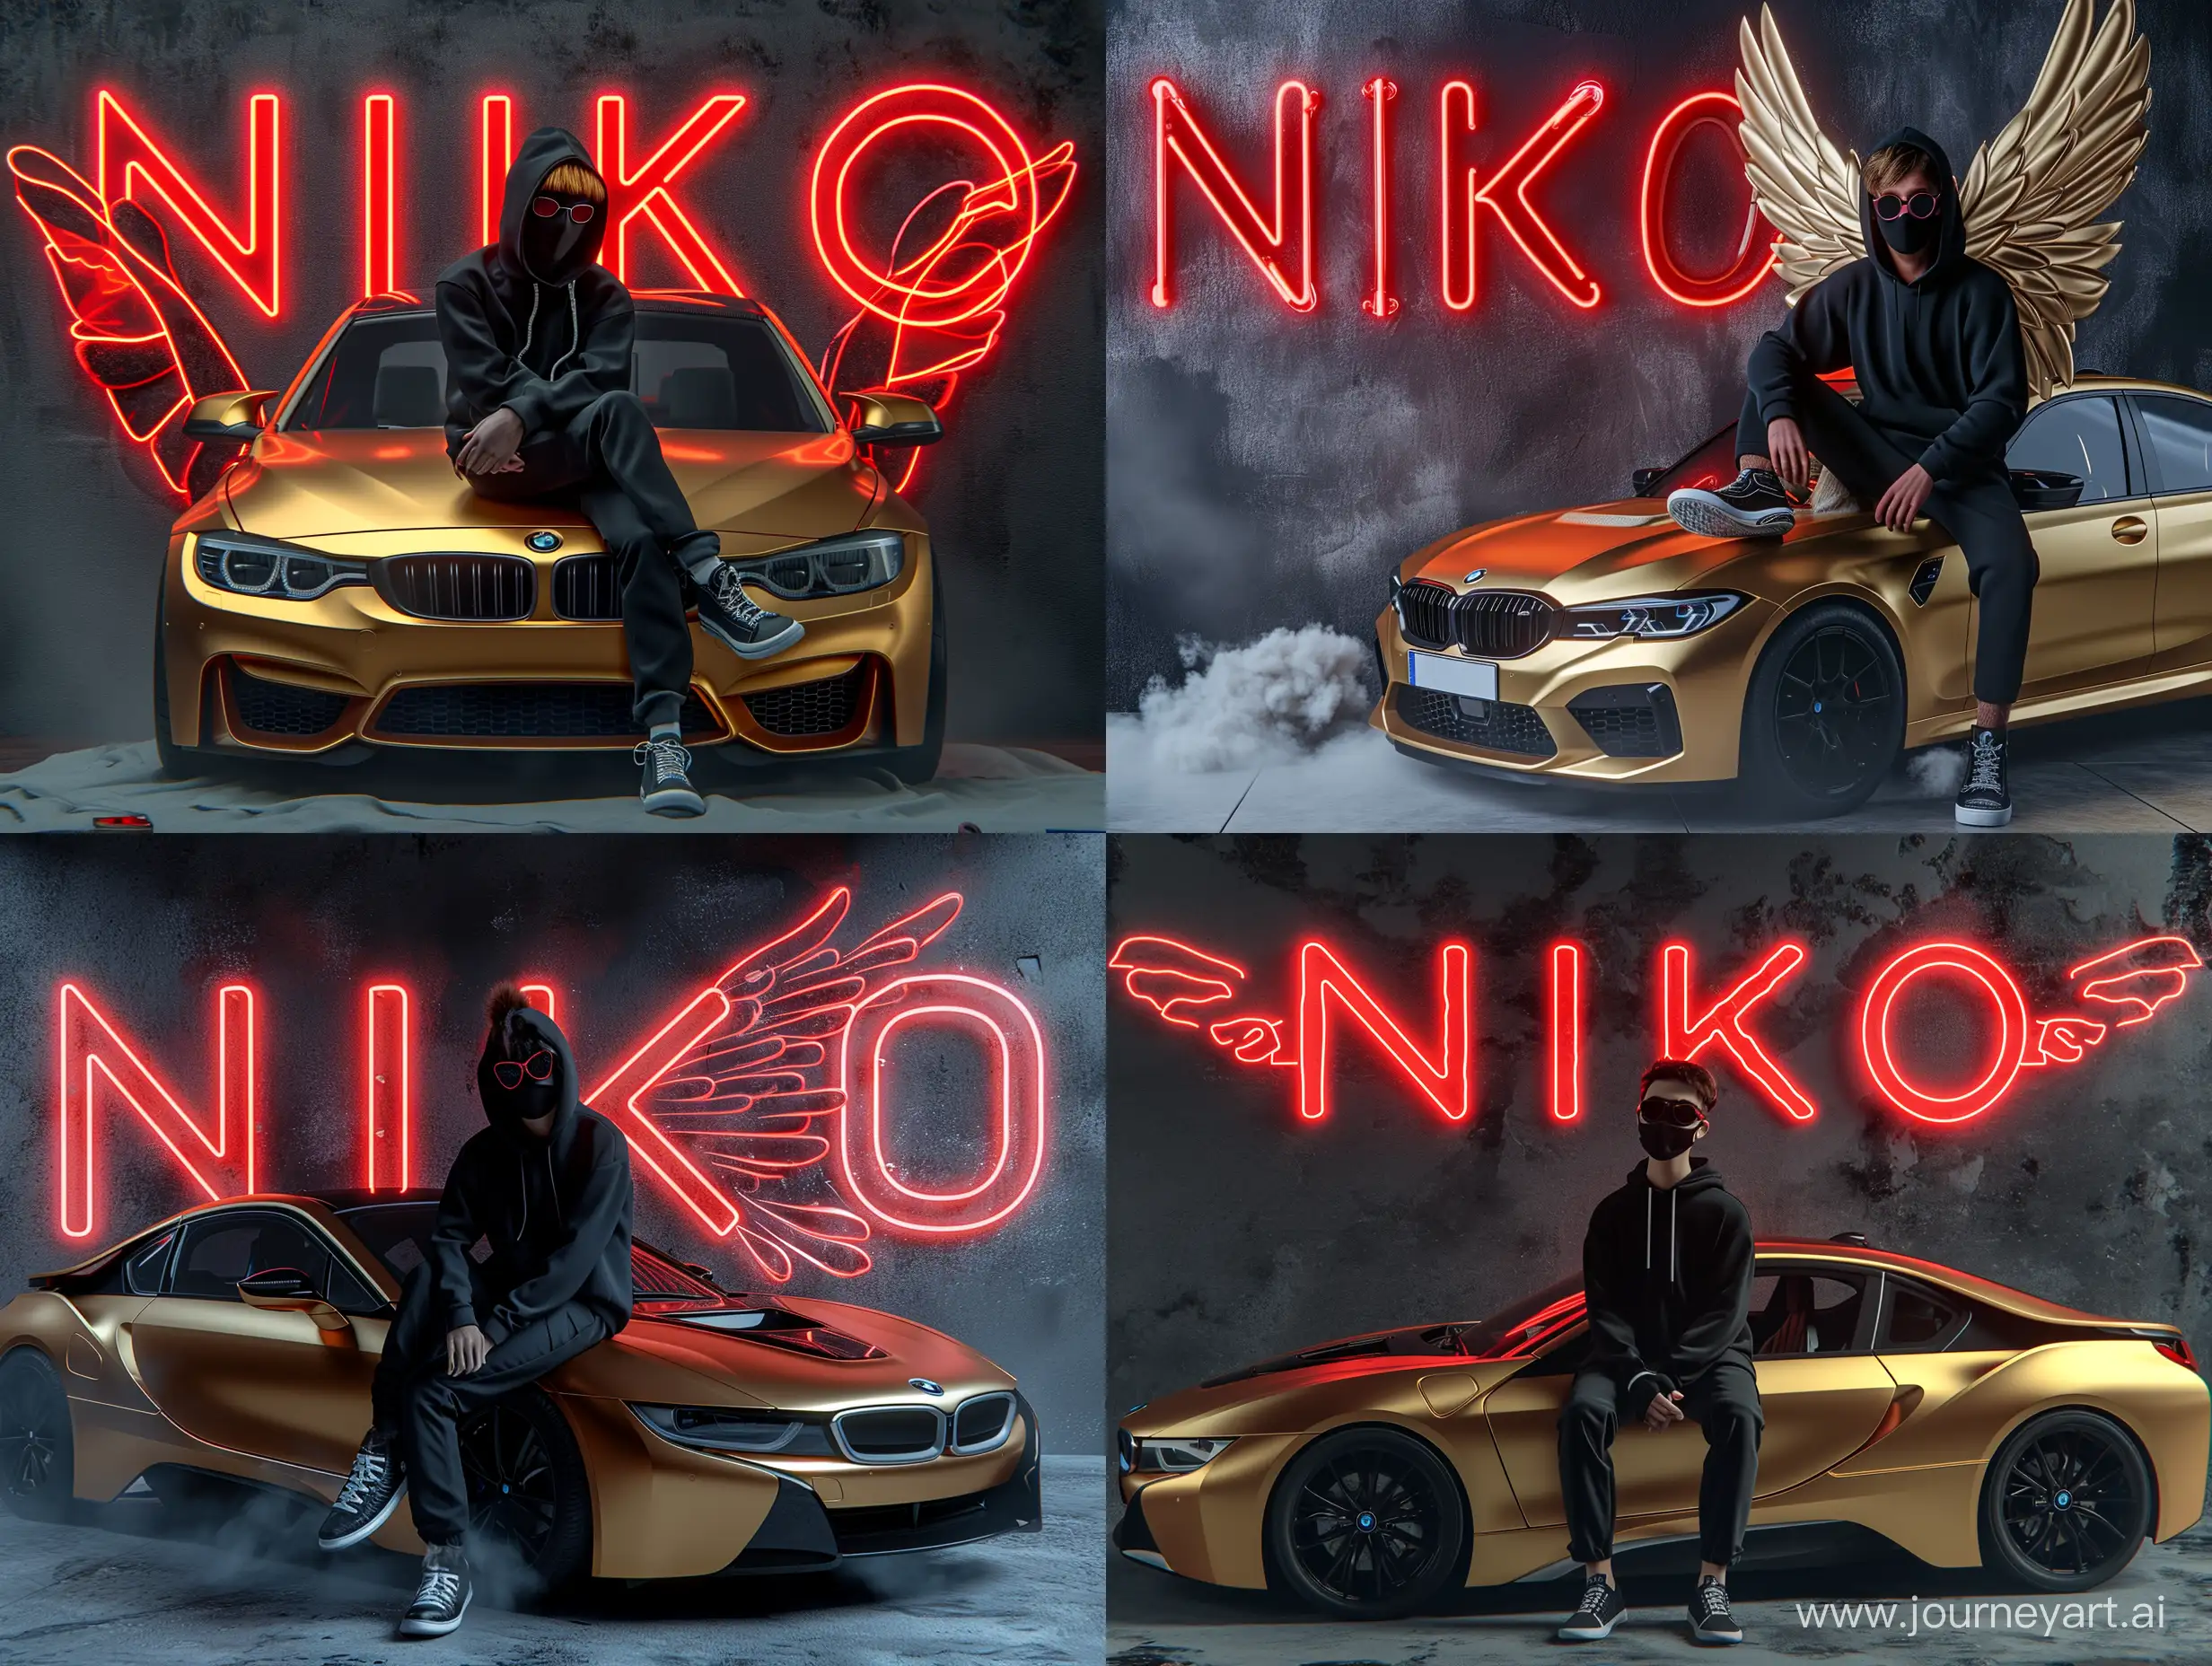 Create a 3D illusion for a profile picture where a 25-Year-old cute boy in a black hoodie Sitting casually on a Golden BMW  car. Wearing sneakers, with black mask, and sunglasses, he looks ahead. The background features "NIKO" in big and capital red neon light fonts on the dark grey wall. and there are wings to make it appear as if he is an angel.